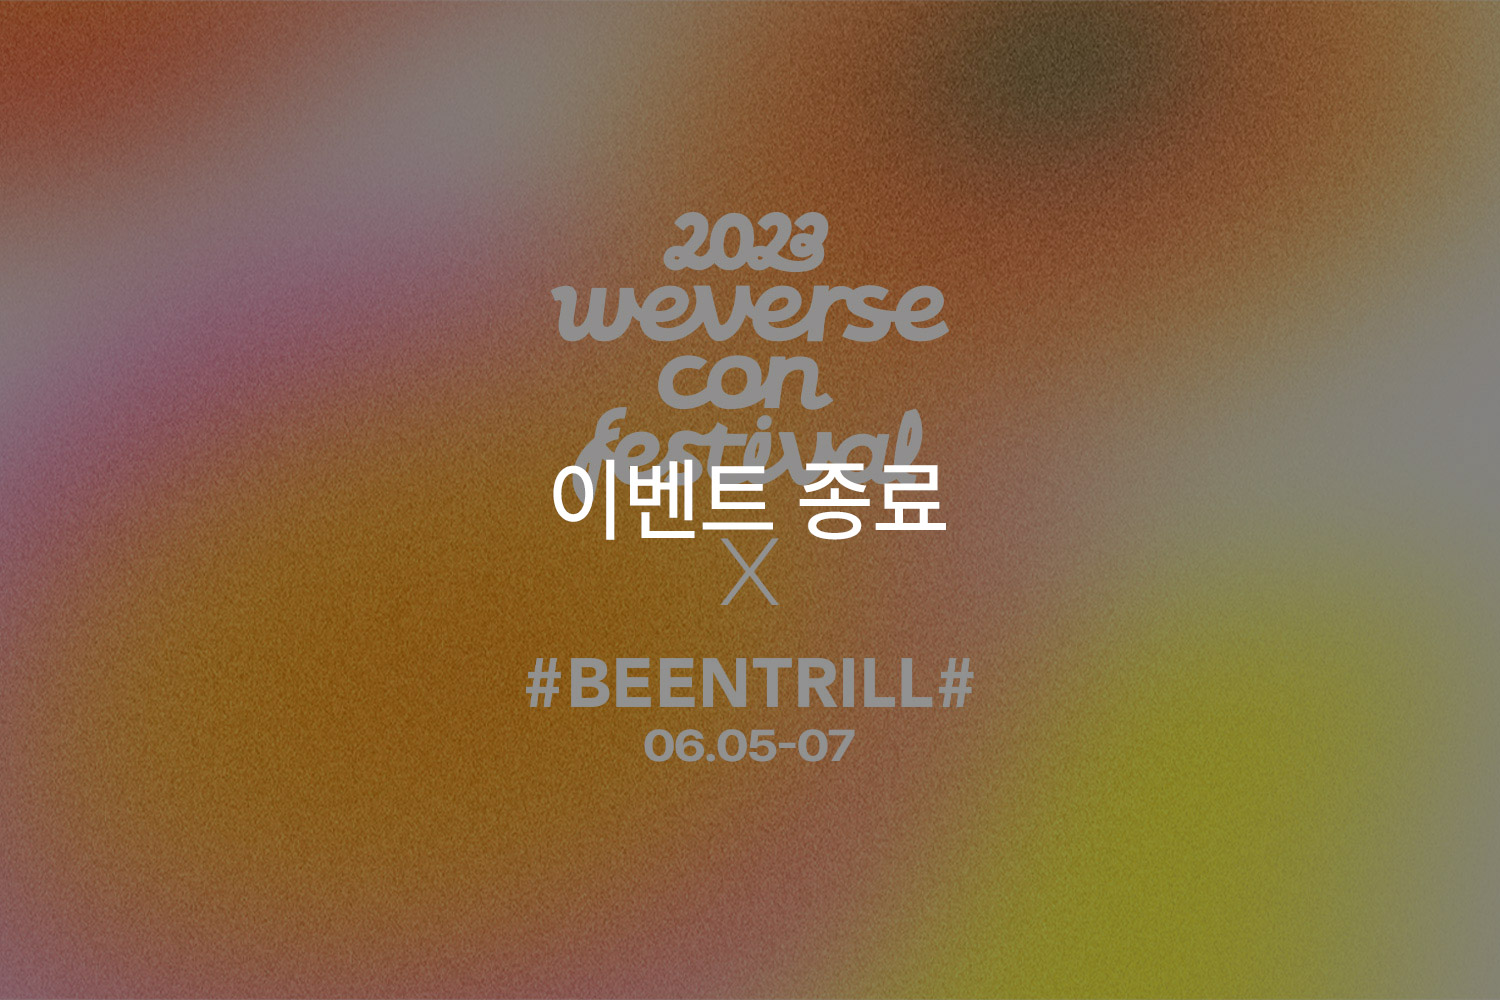 BEENTRILL X WEVERSECON